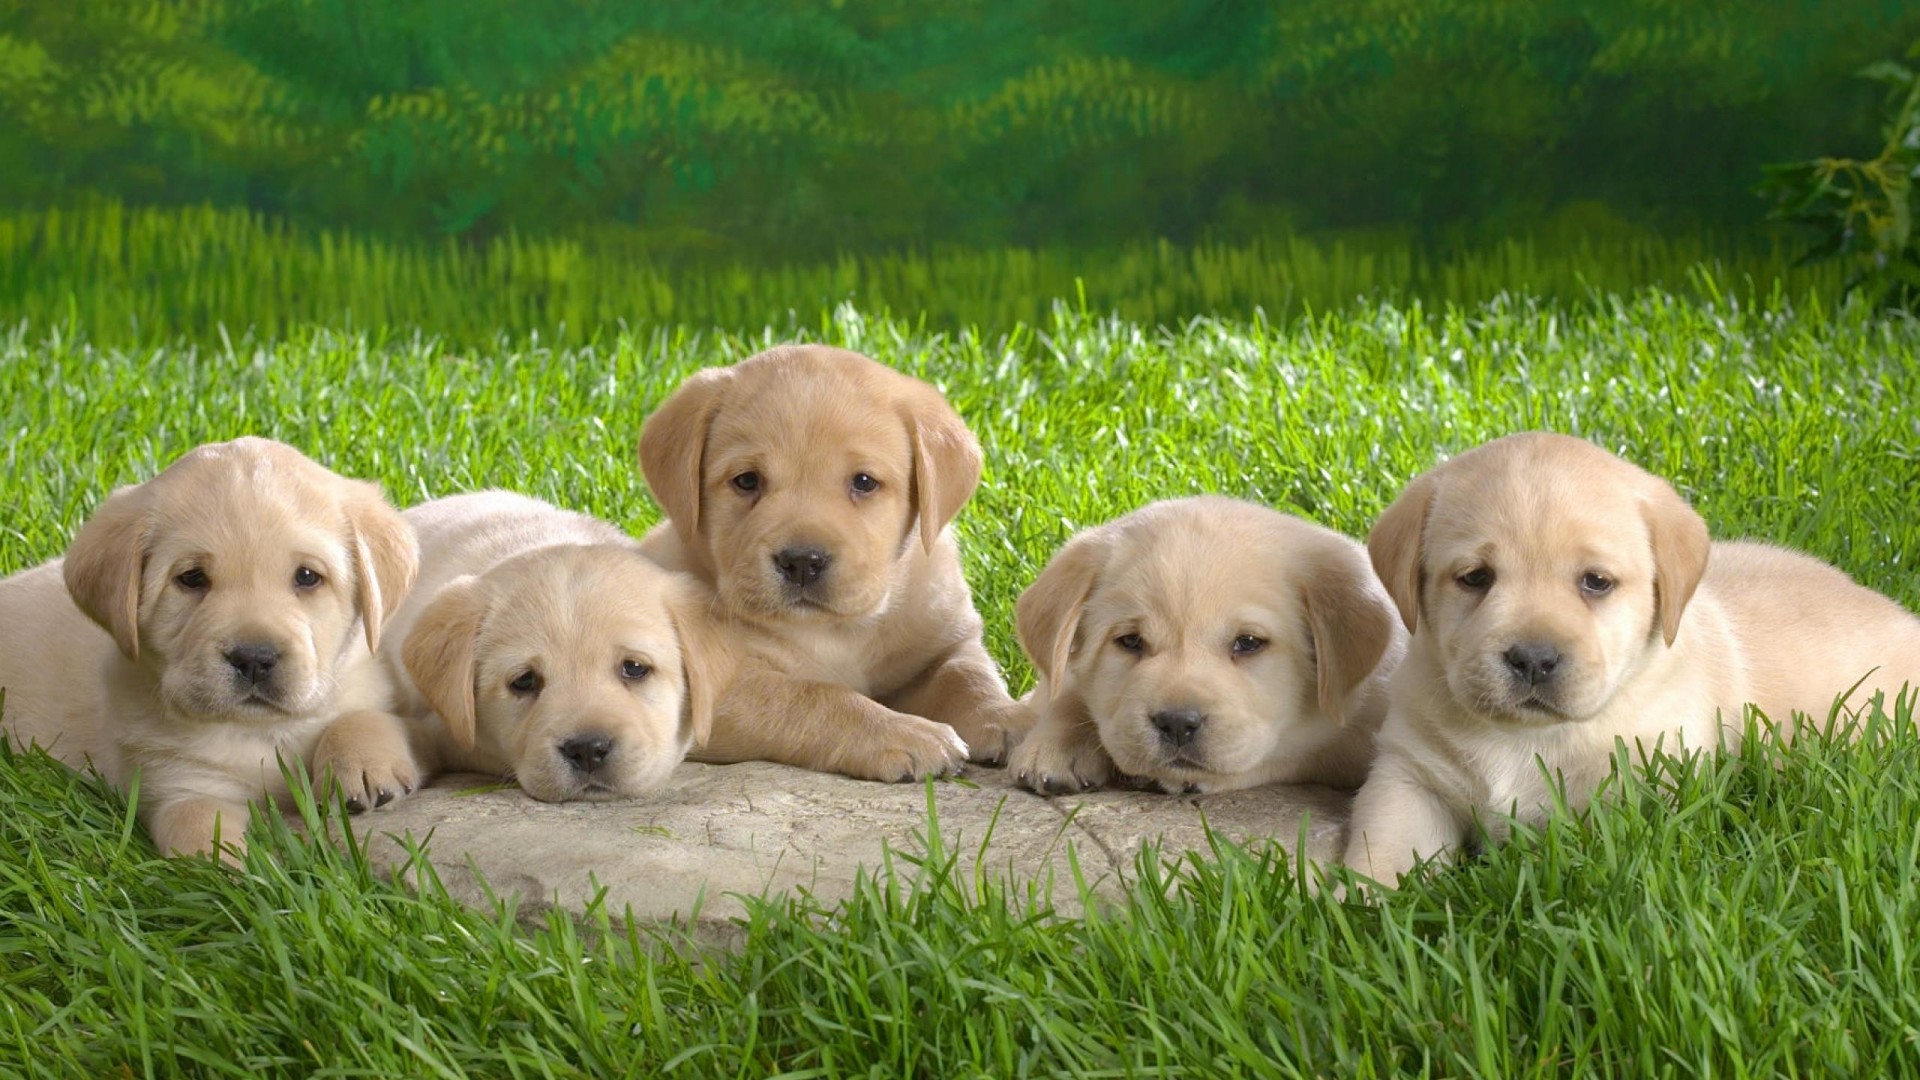 hd wallpapers of puppy labrador Download Latest HD Wallpapers